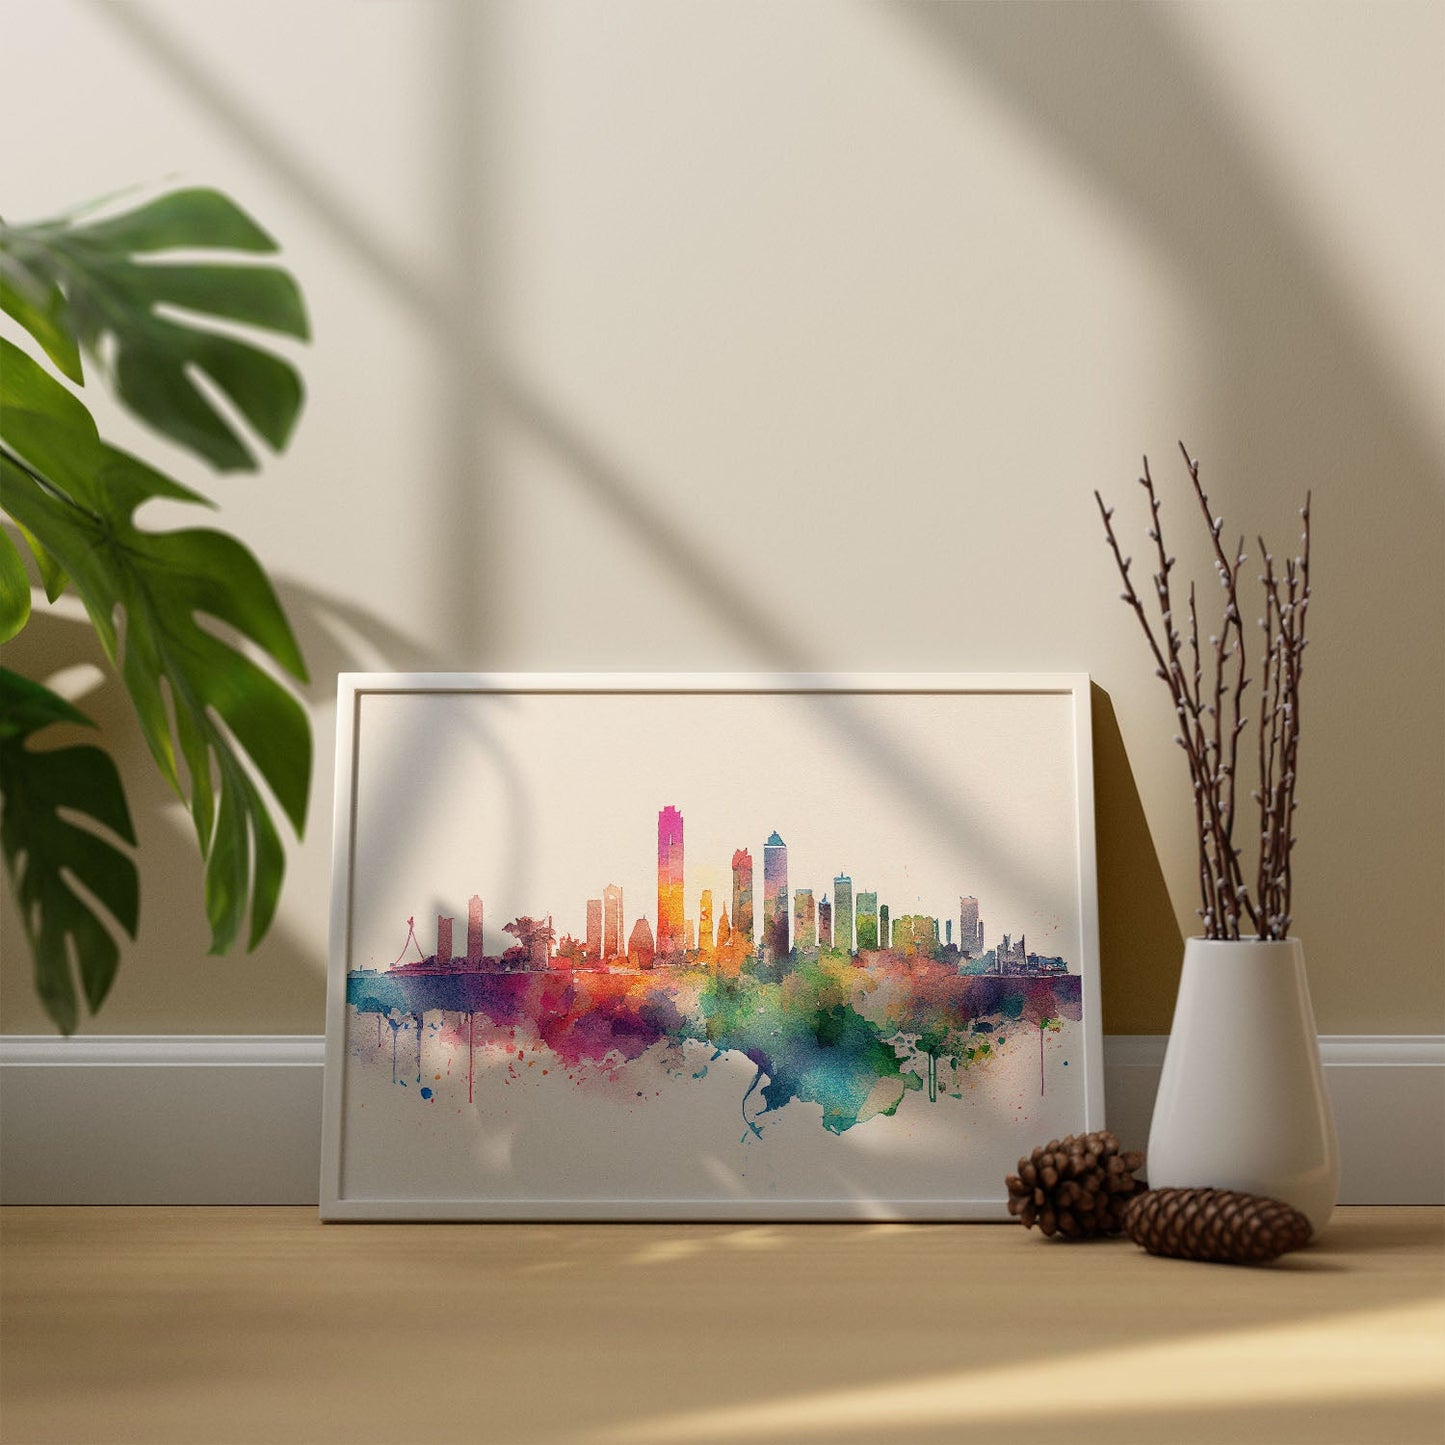 Nacnic watercolor of a skyline of the city of Tel Aviv_1. Aesthetic Wall Art Prints for Bedroom or Living Room Design.-Artwork-Nacnic-A4-Sin Marco-Nacnic Estudio SL